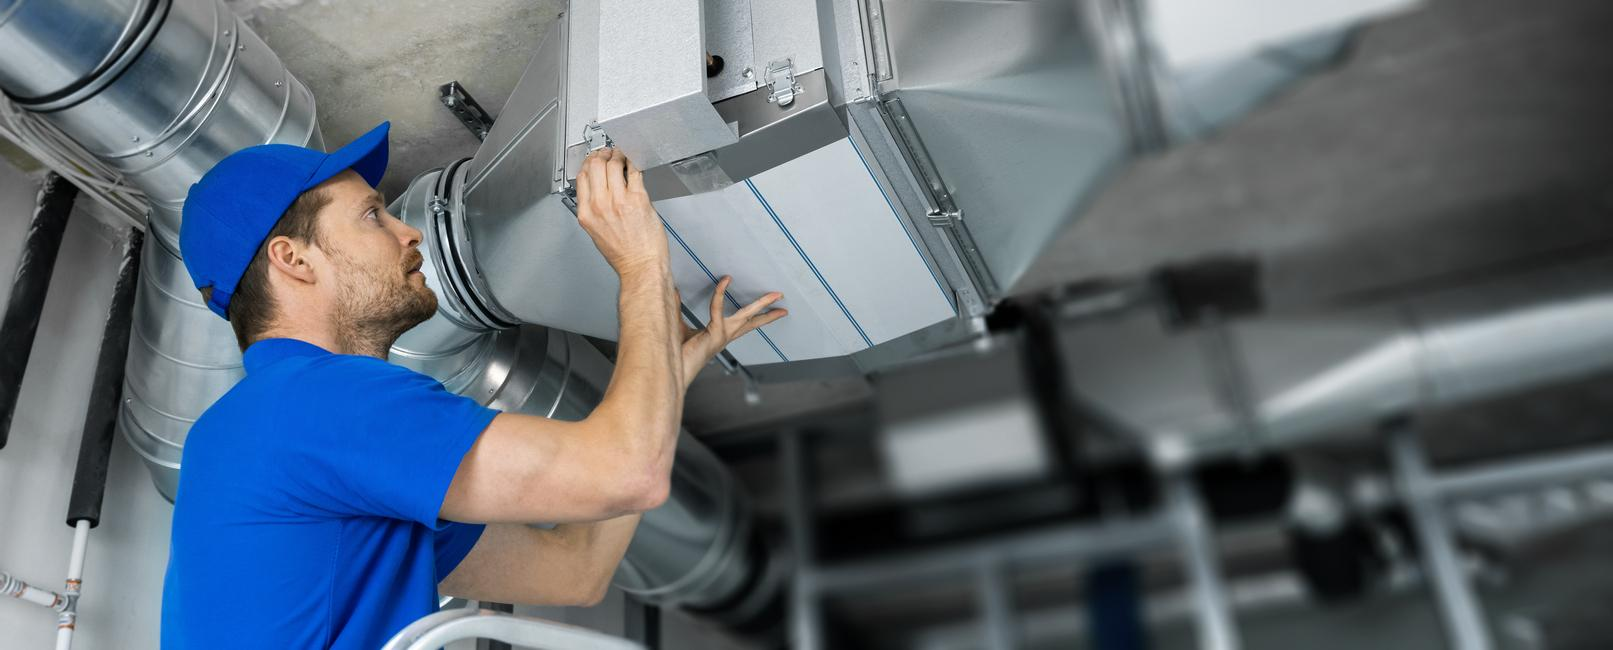 Ductwork Packages: Simplifying Installation with Comprehensive Solutions for Installers